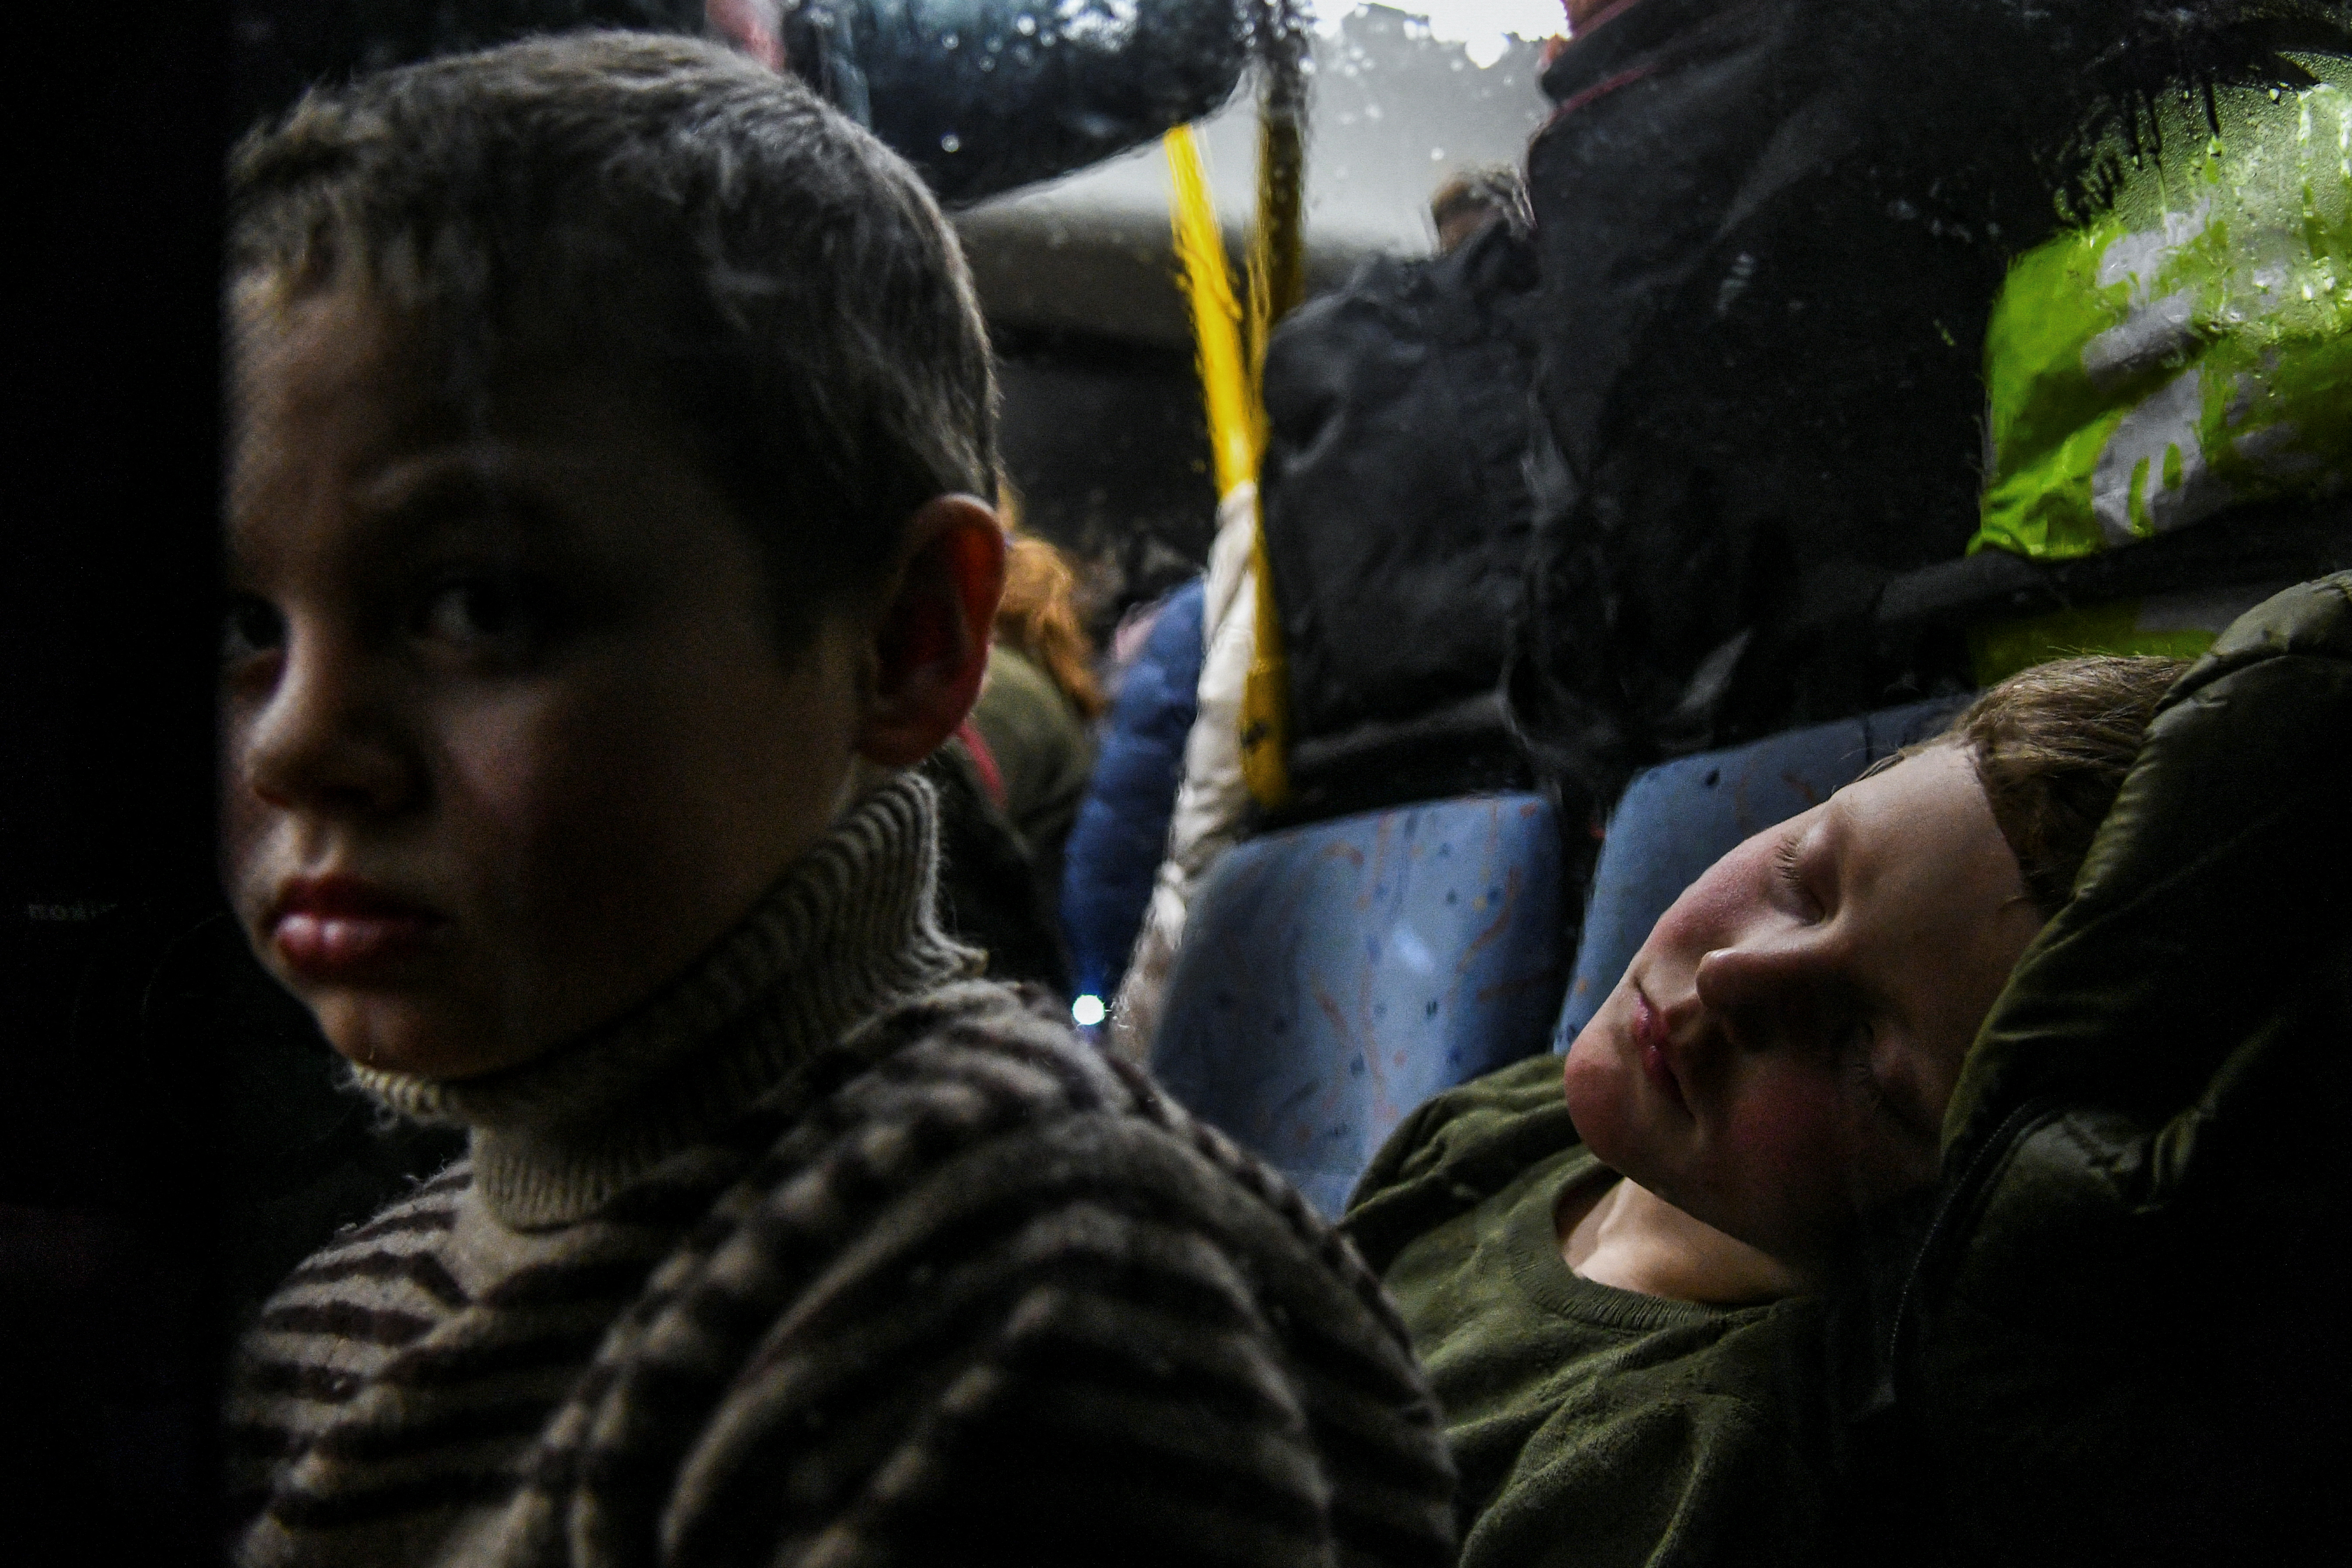 Children rest inside an evacuee bus after they fled from Mariupol to Zaporizhzhia